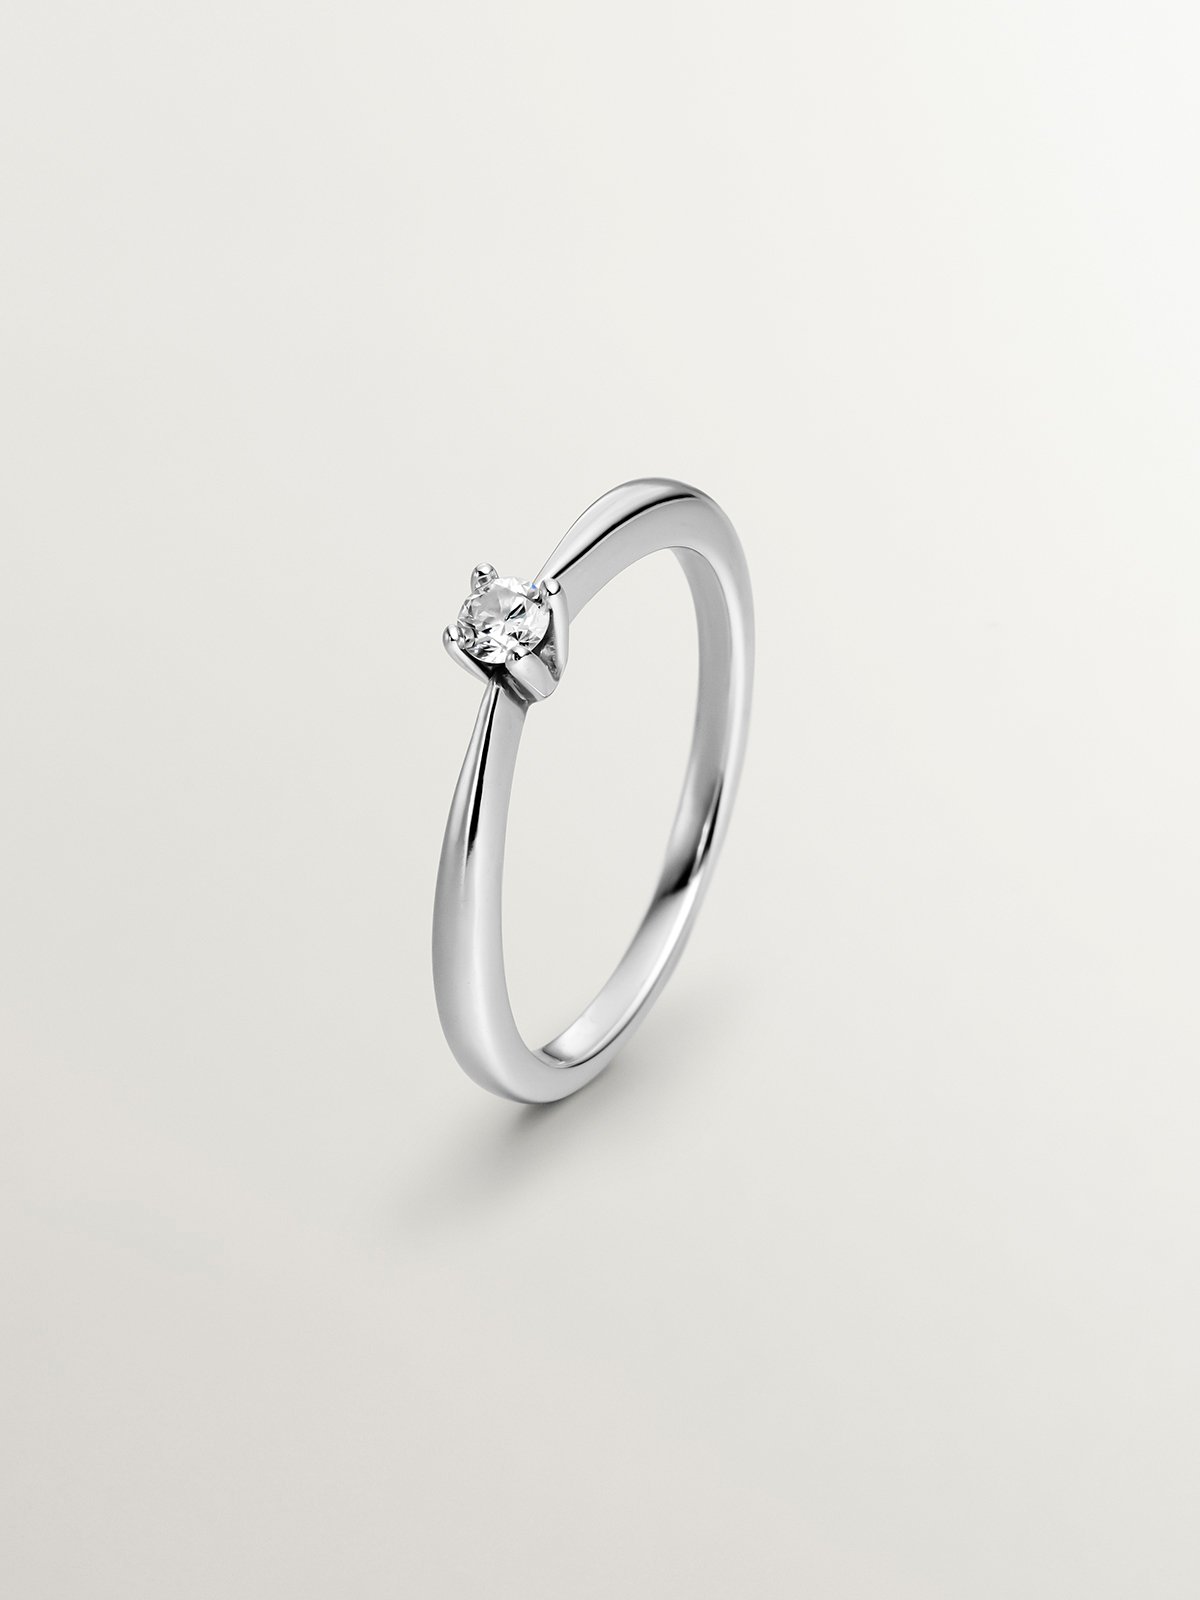 18K White Gold Solitaire Ring with a 0.08 cts Diamond.